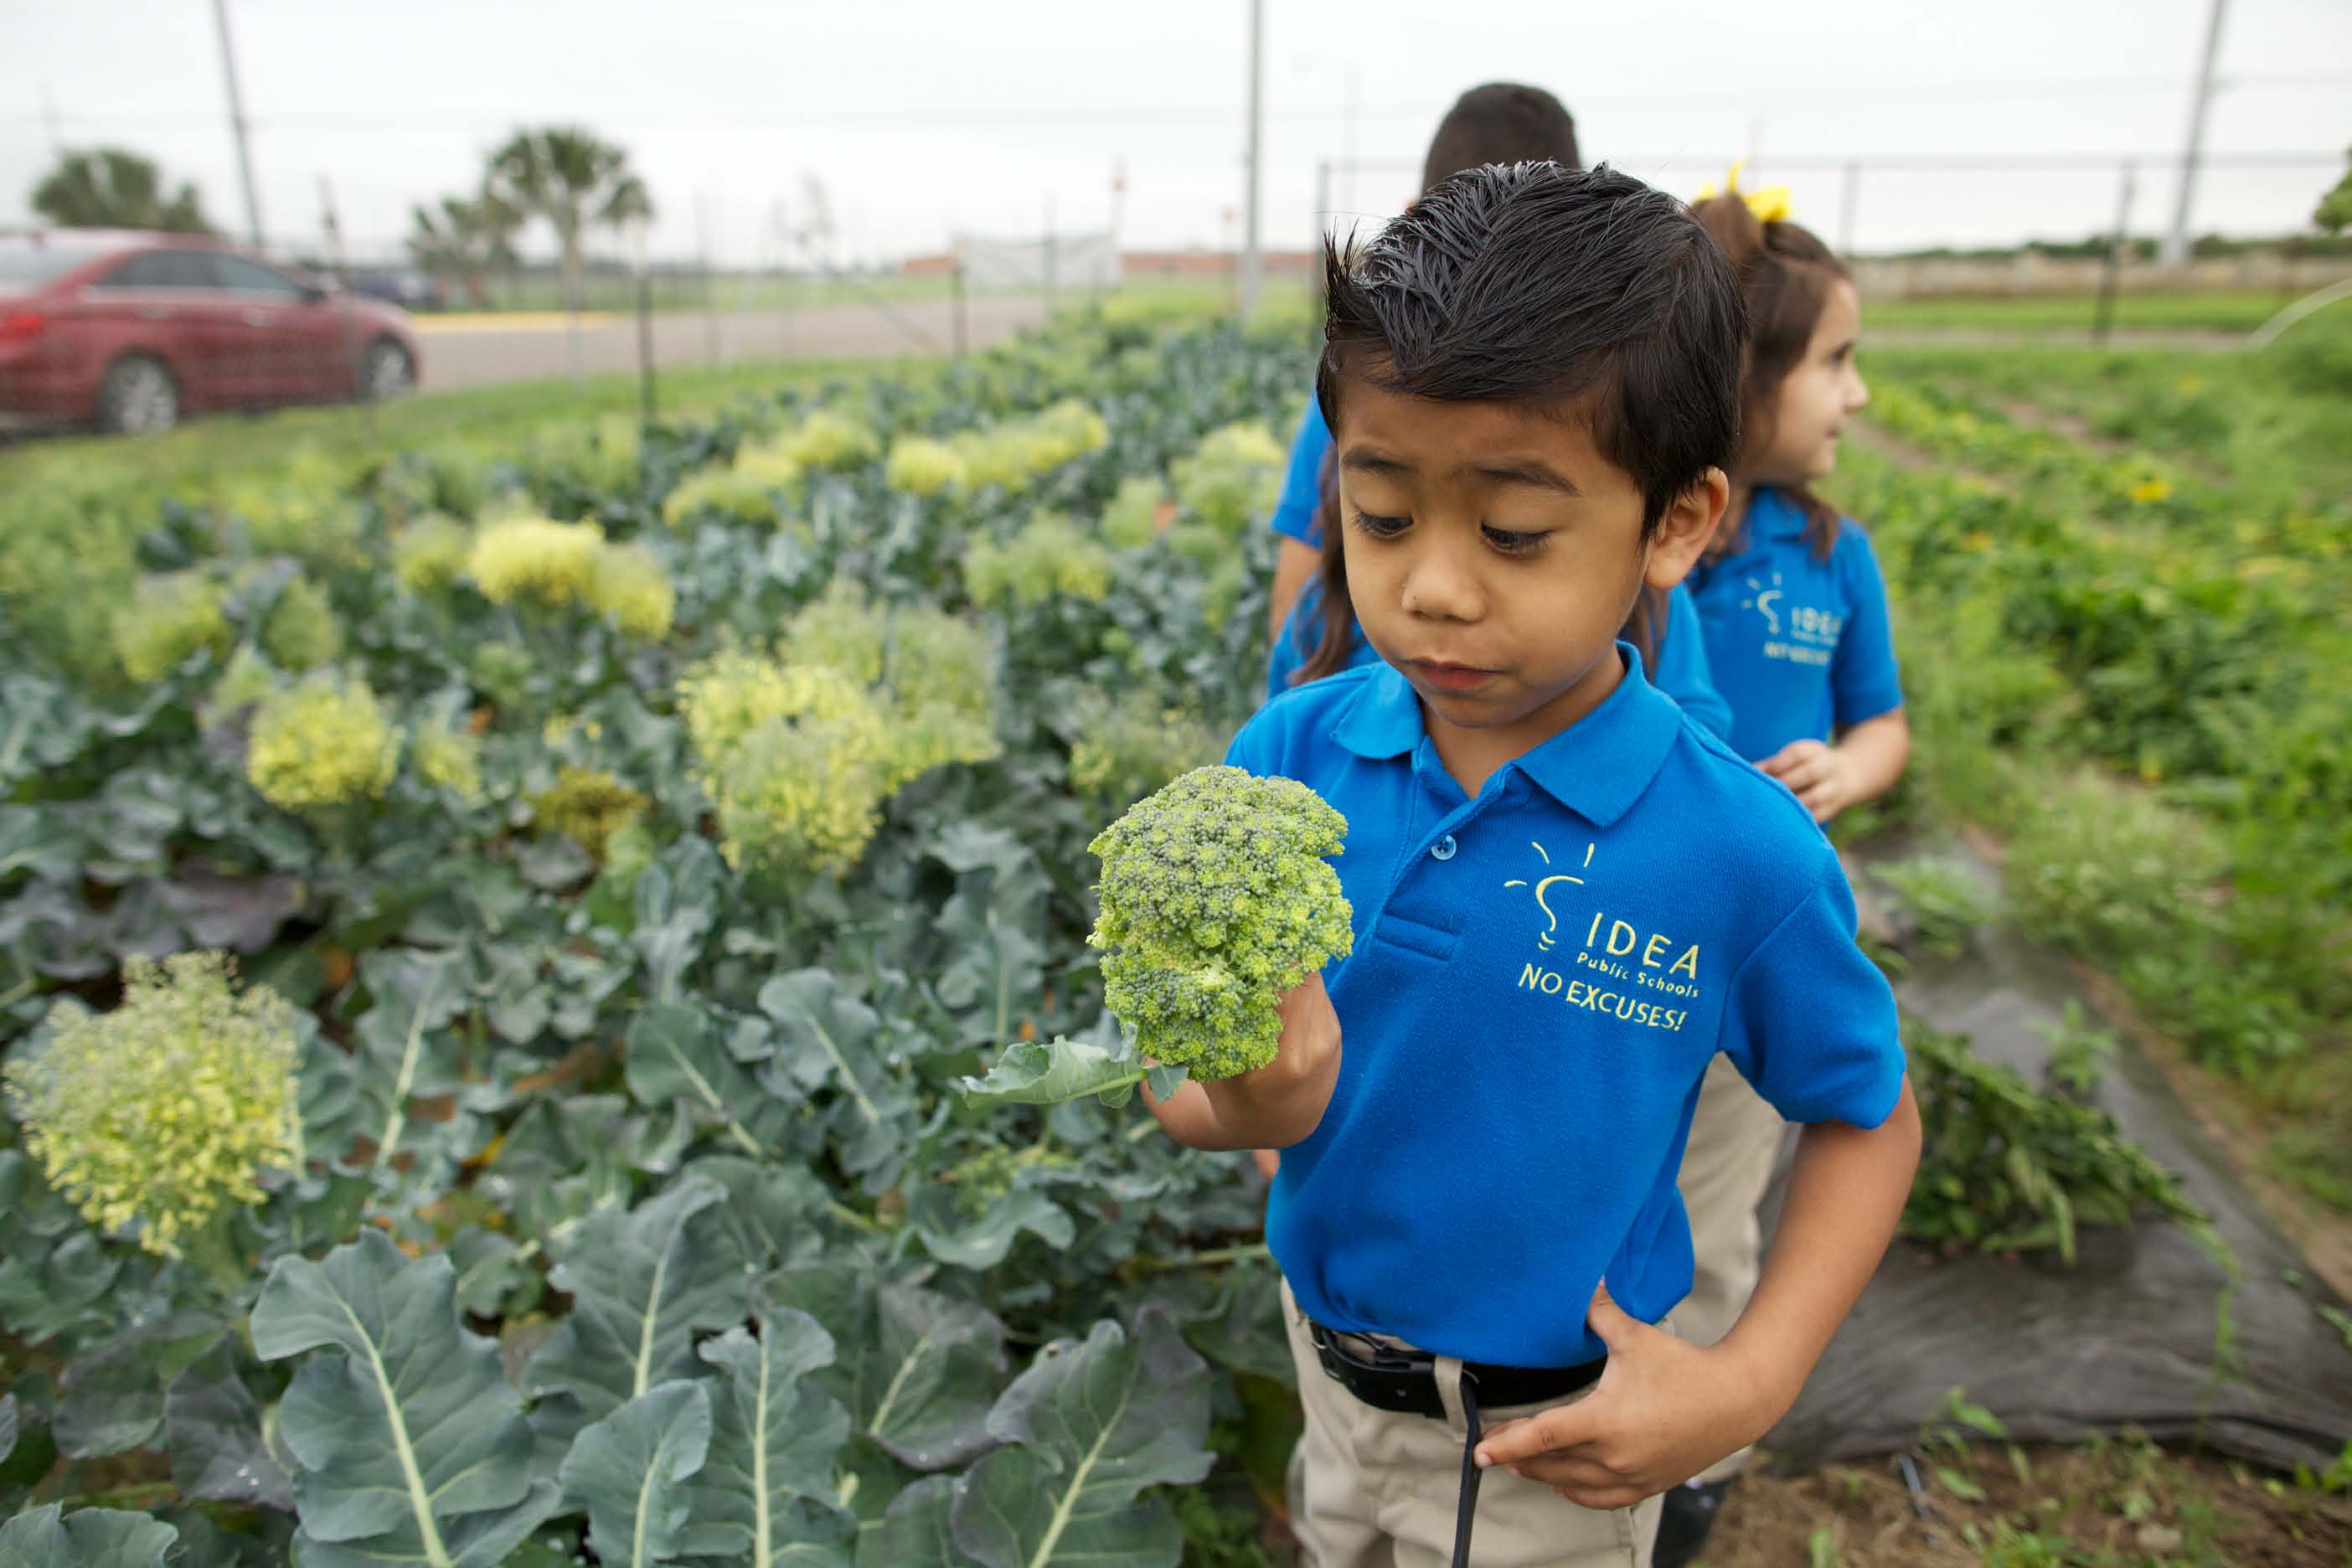 A student checks out some of the broccoli, fresh from the school farm. Photo by IDEA Public Schools